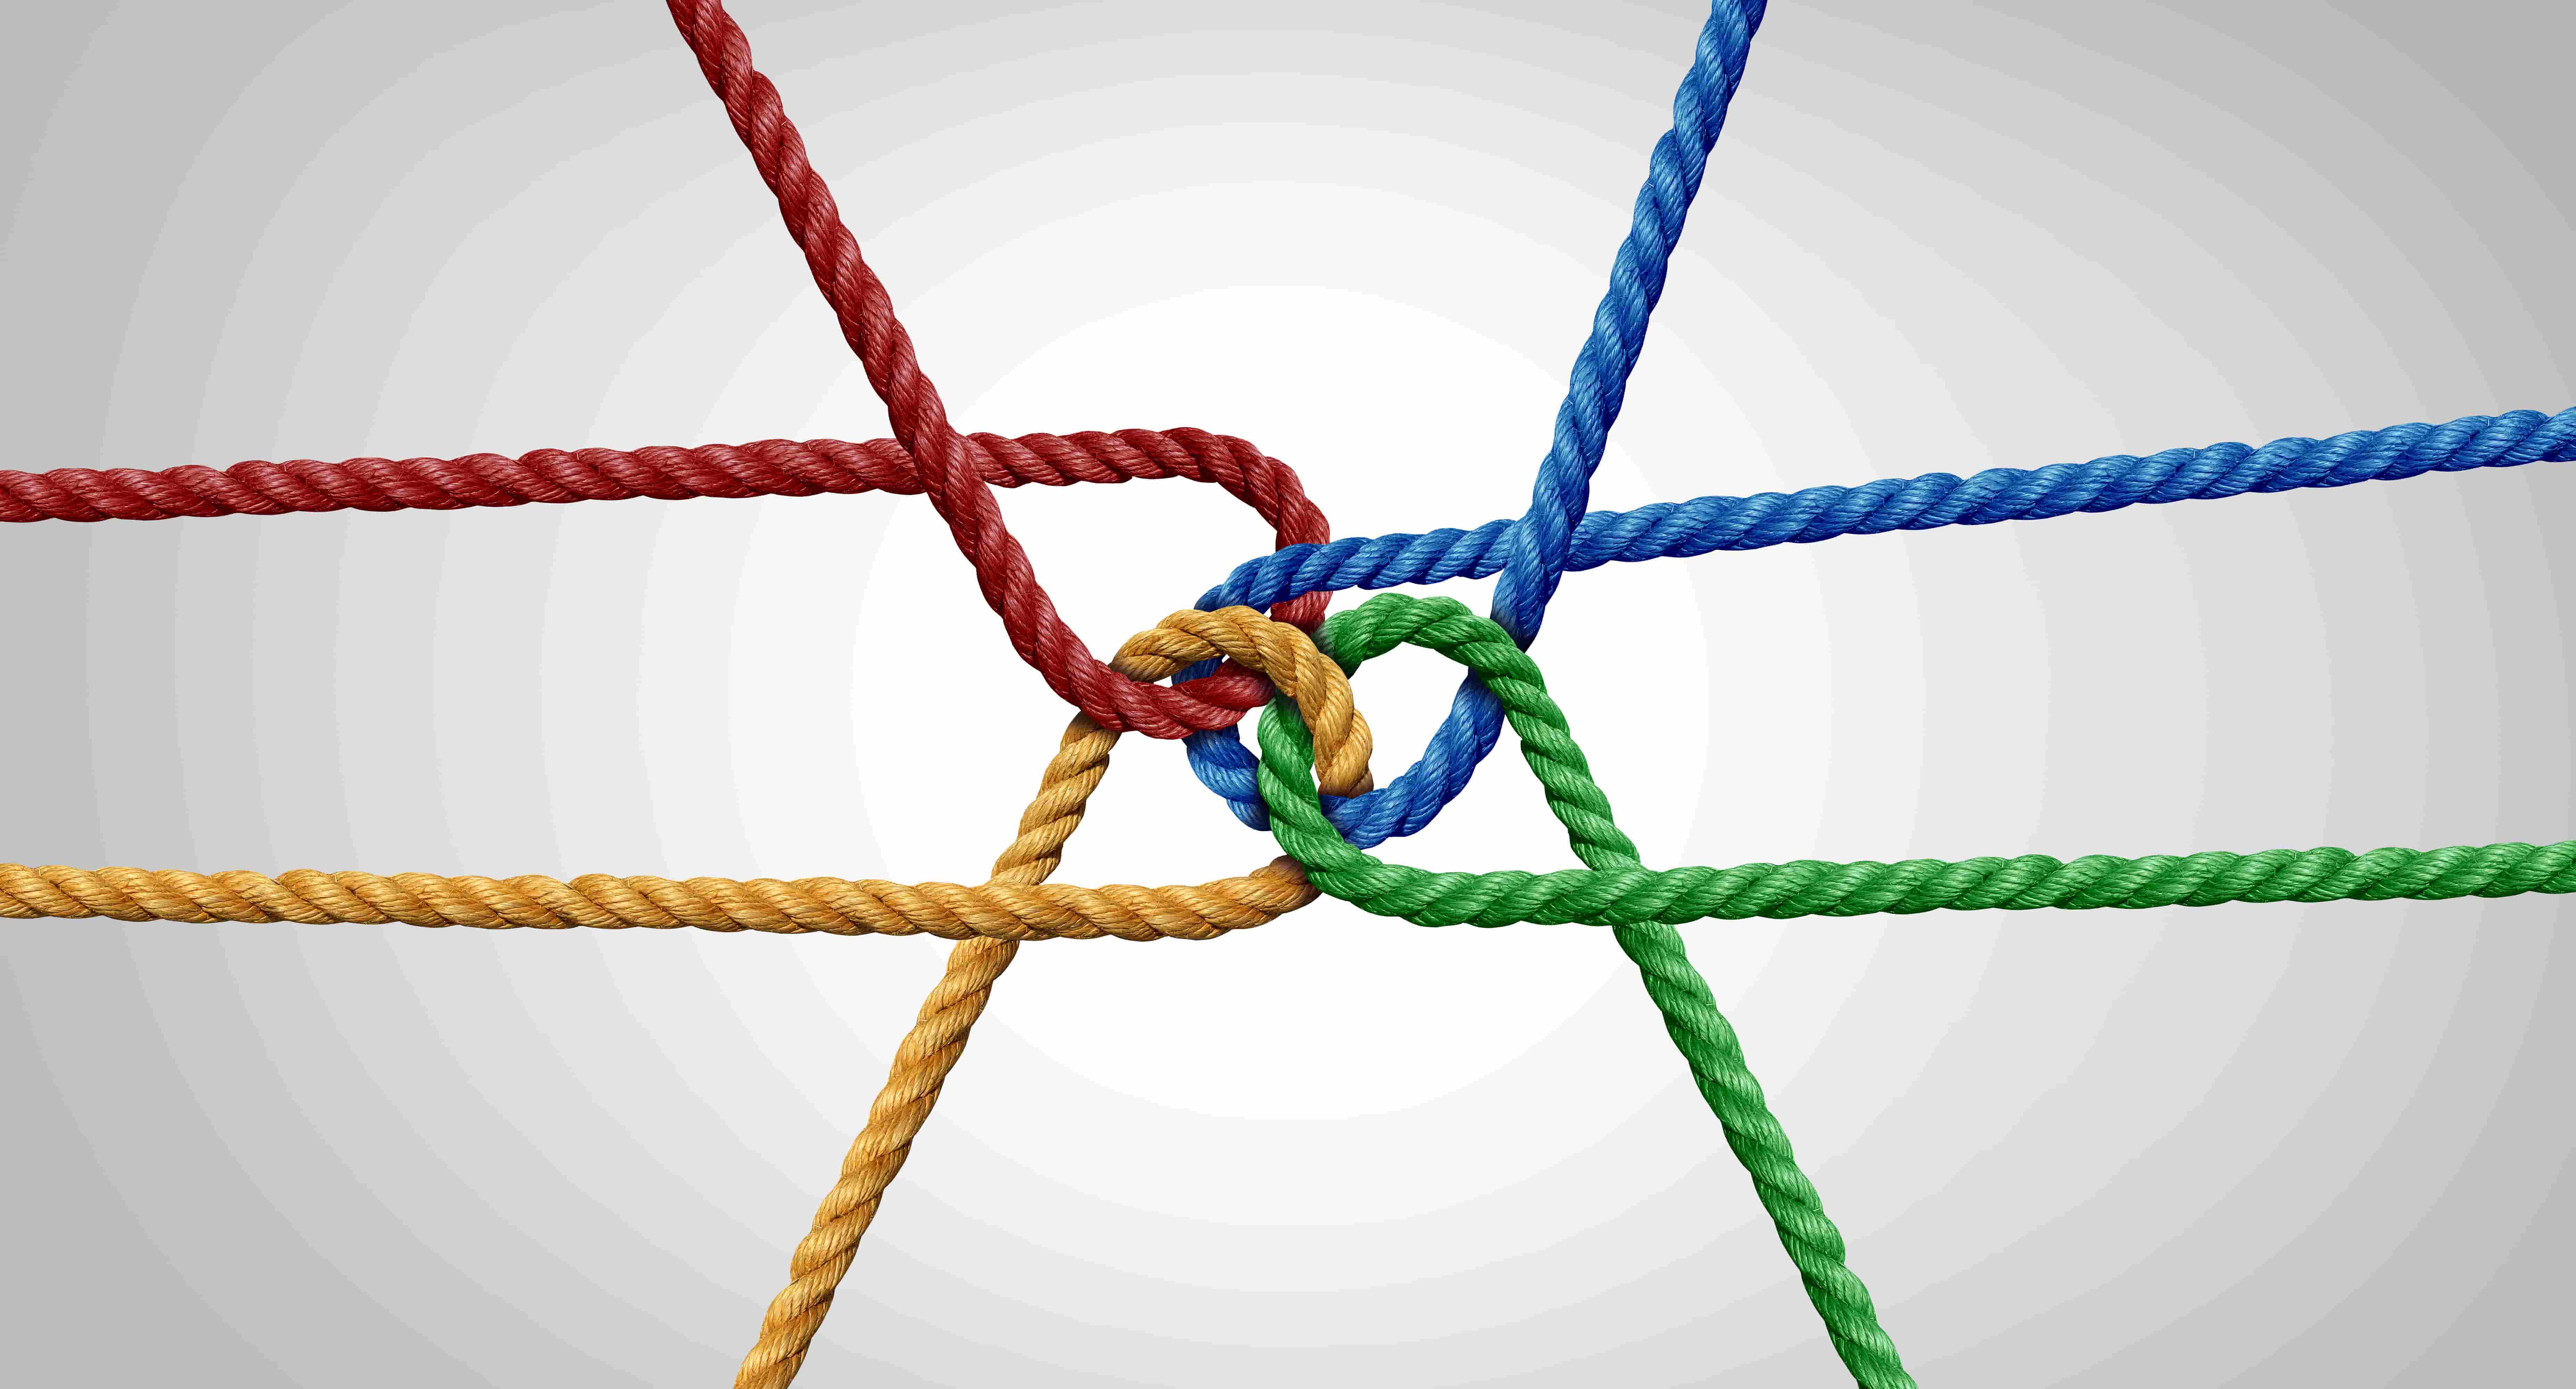 red, green, yellow and blue rope interlinking 